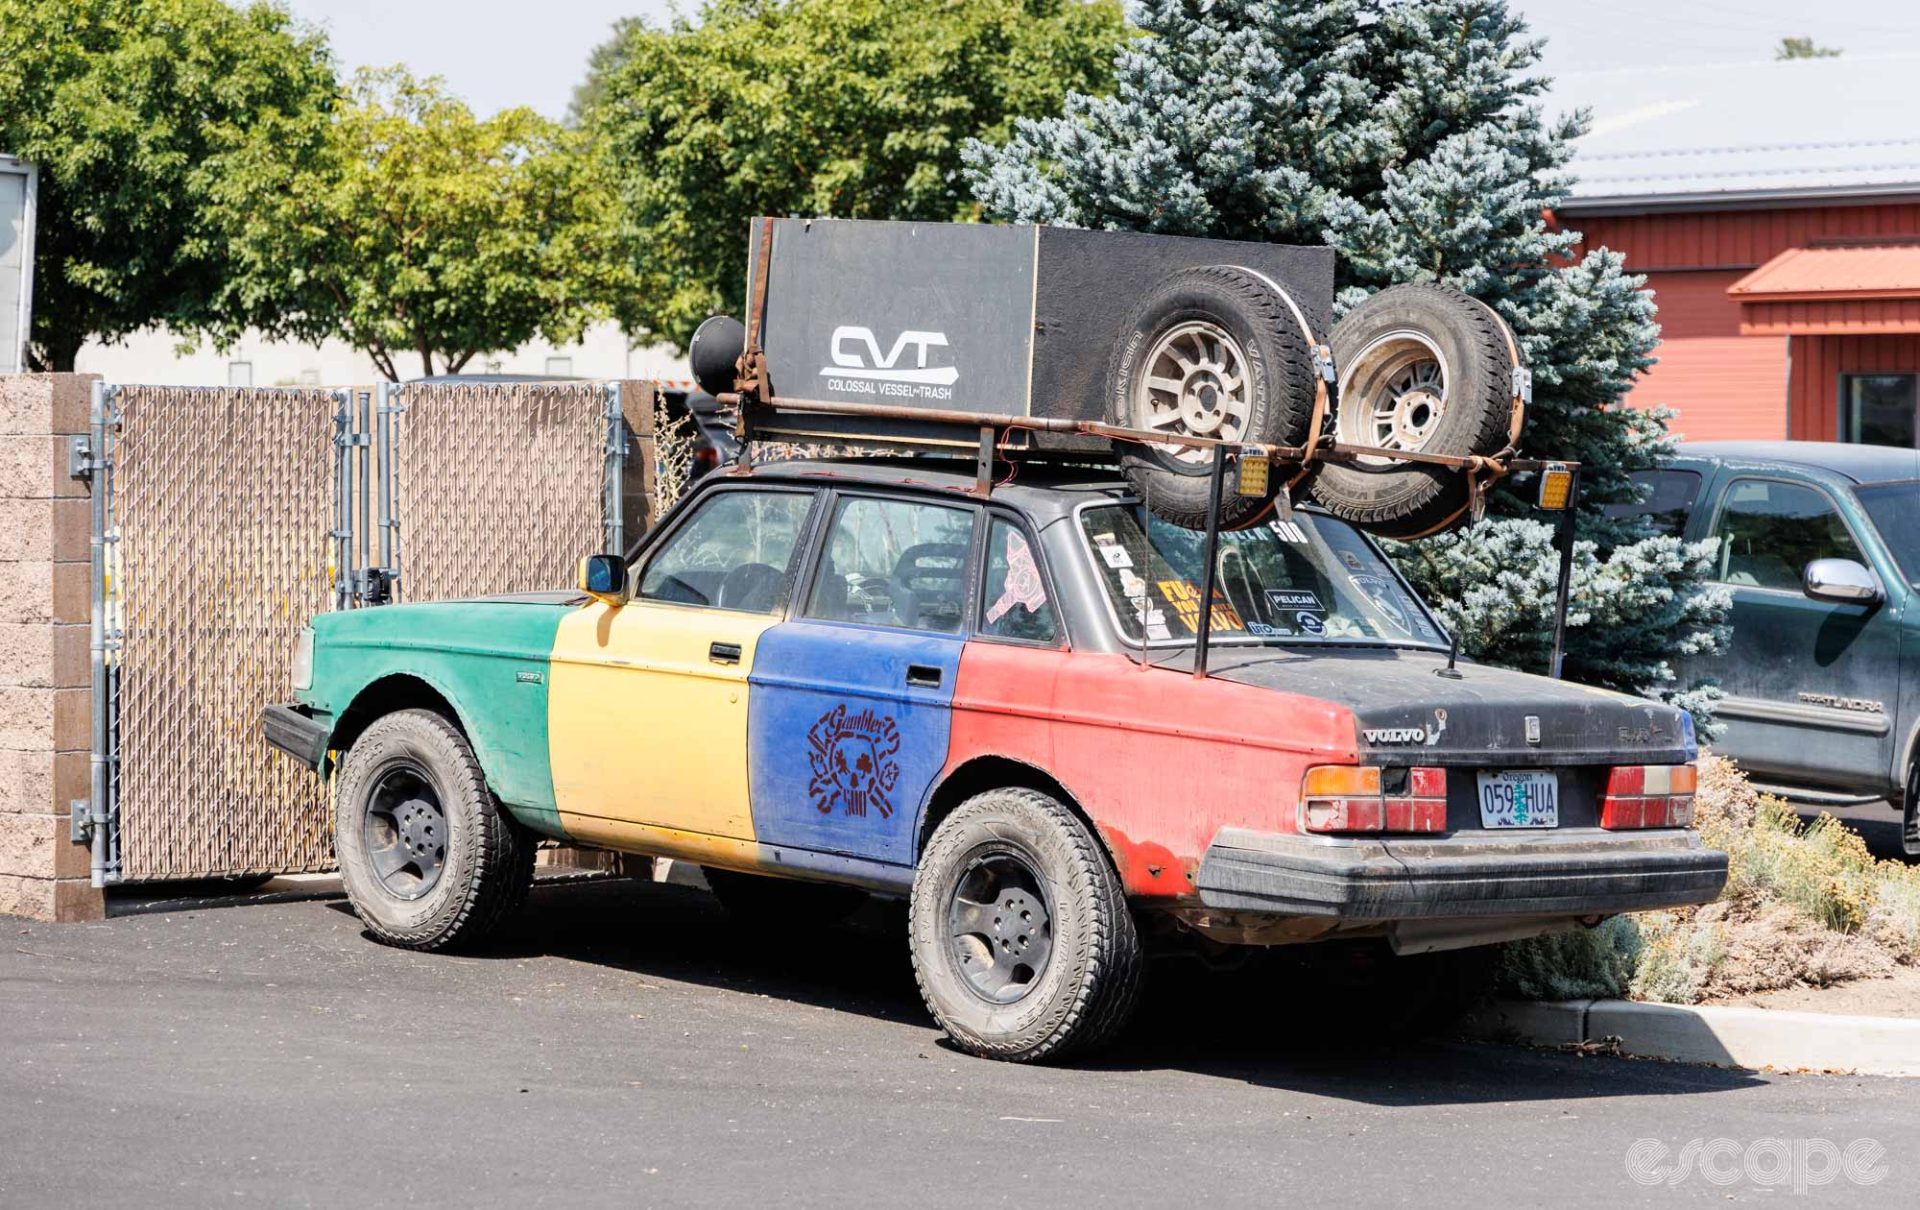 A dilapidated Volvo sedan, with body panels in green, yellow, blue, red, and black. The car is lifted and has oversize rally tires, two spares and a large box on a custom roof rack.